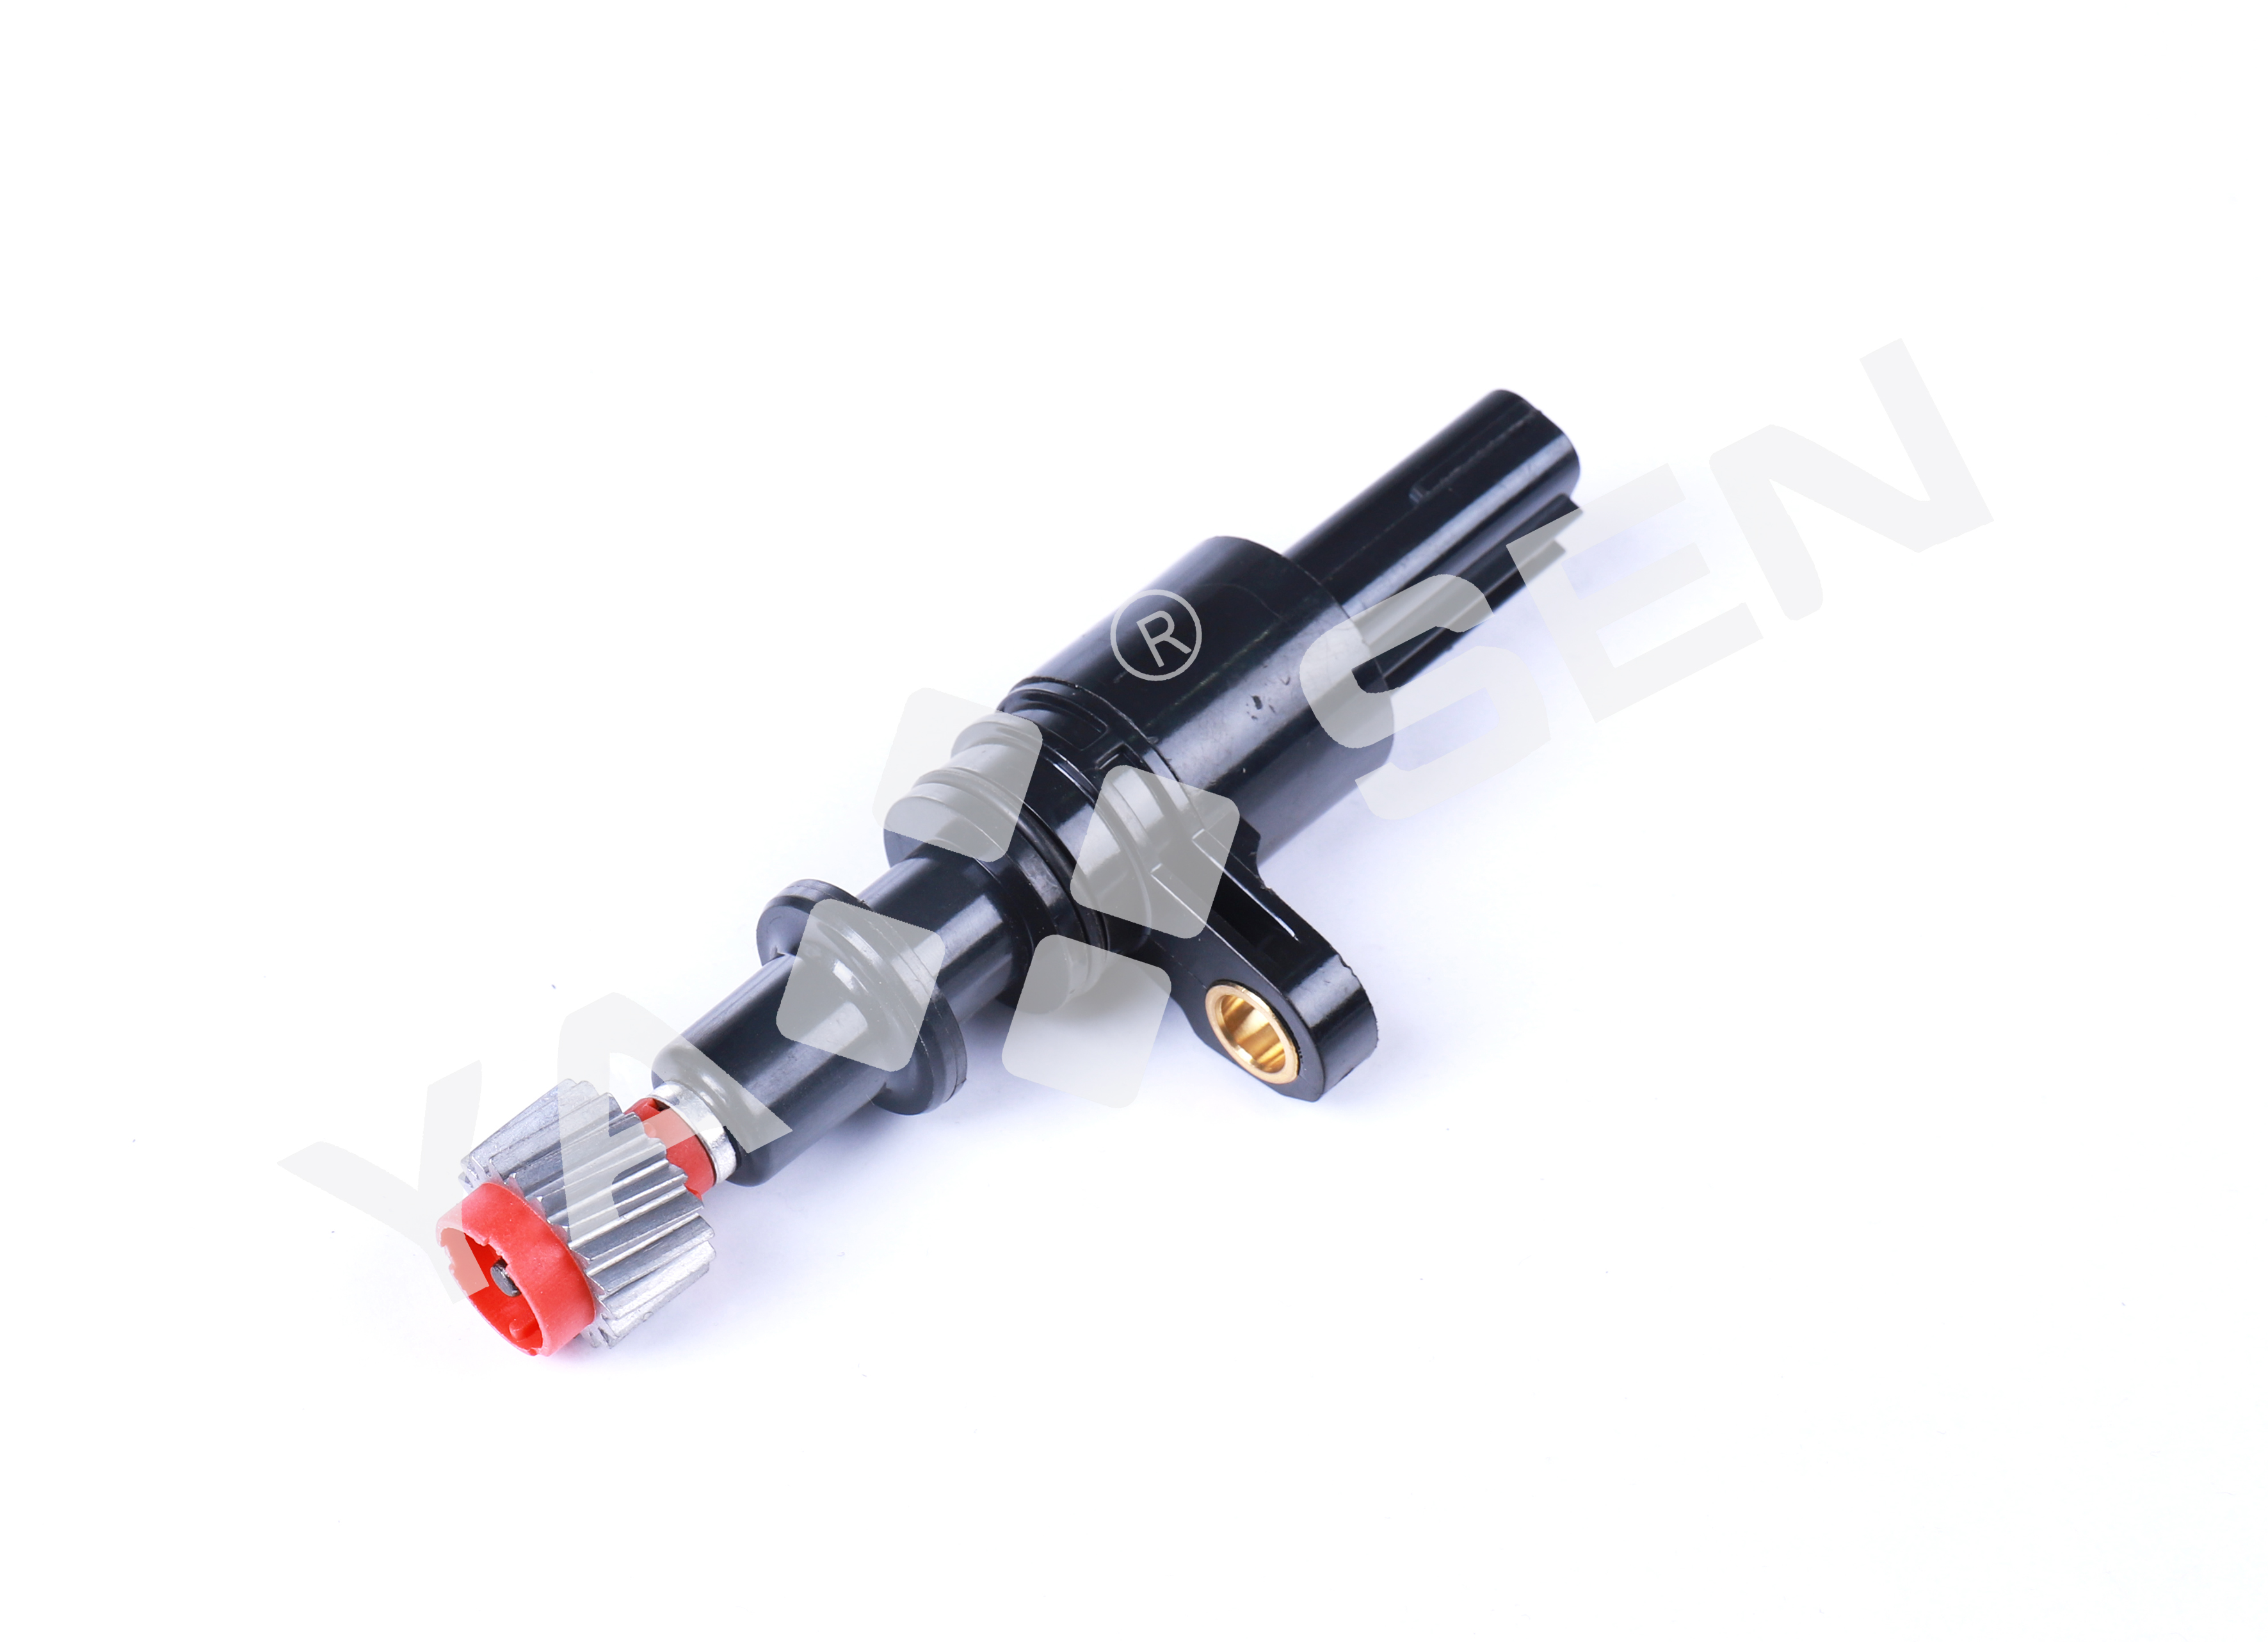 Auto SPEED sensor  for HONDA, 5S4883, 78410S5A911 78410S5A912 SU5475 SU6210 0905056 1433066 78410-S5A-911 78410-S5A-912 5S4734 S